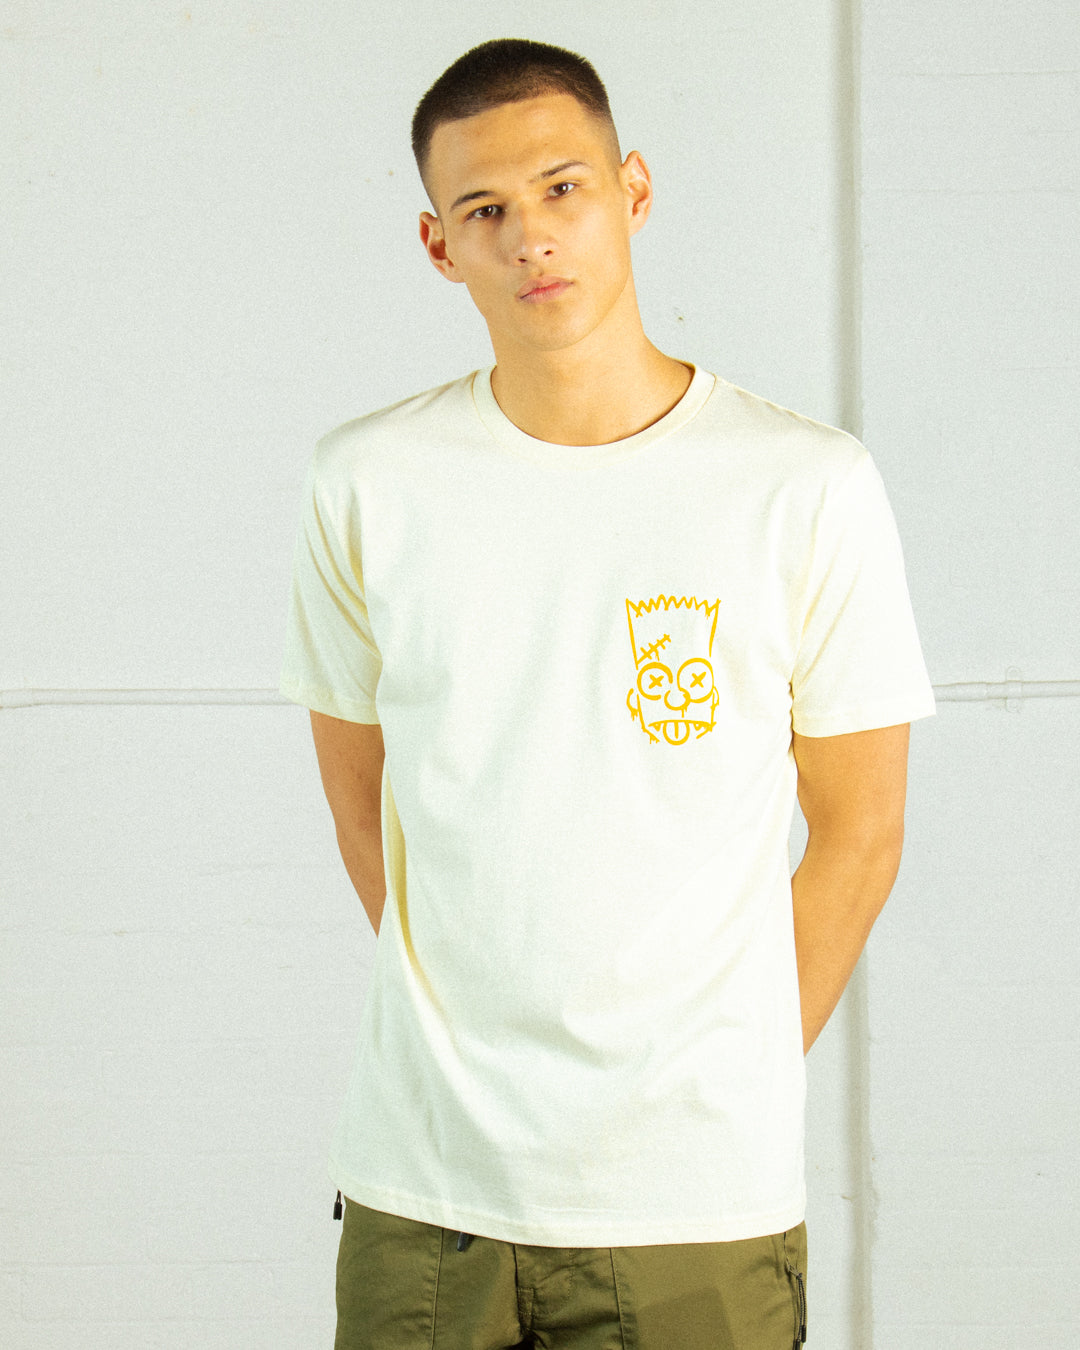 FCRB THE SIMPSONS GRAFFITI TEE - トップス